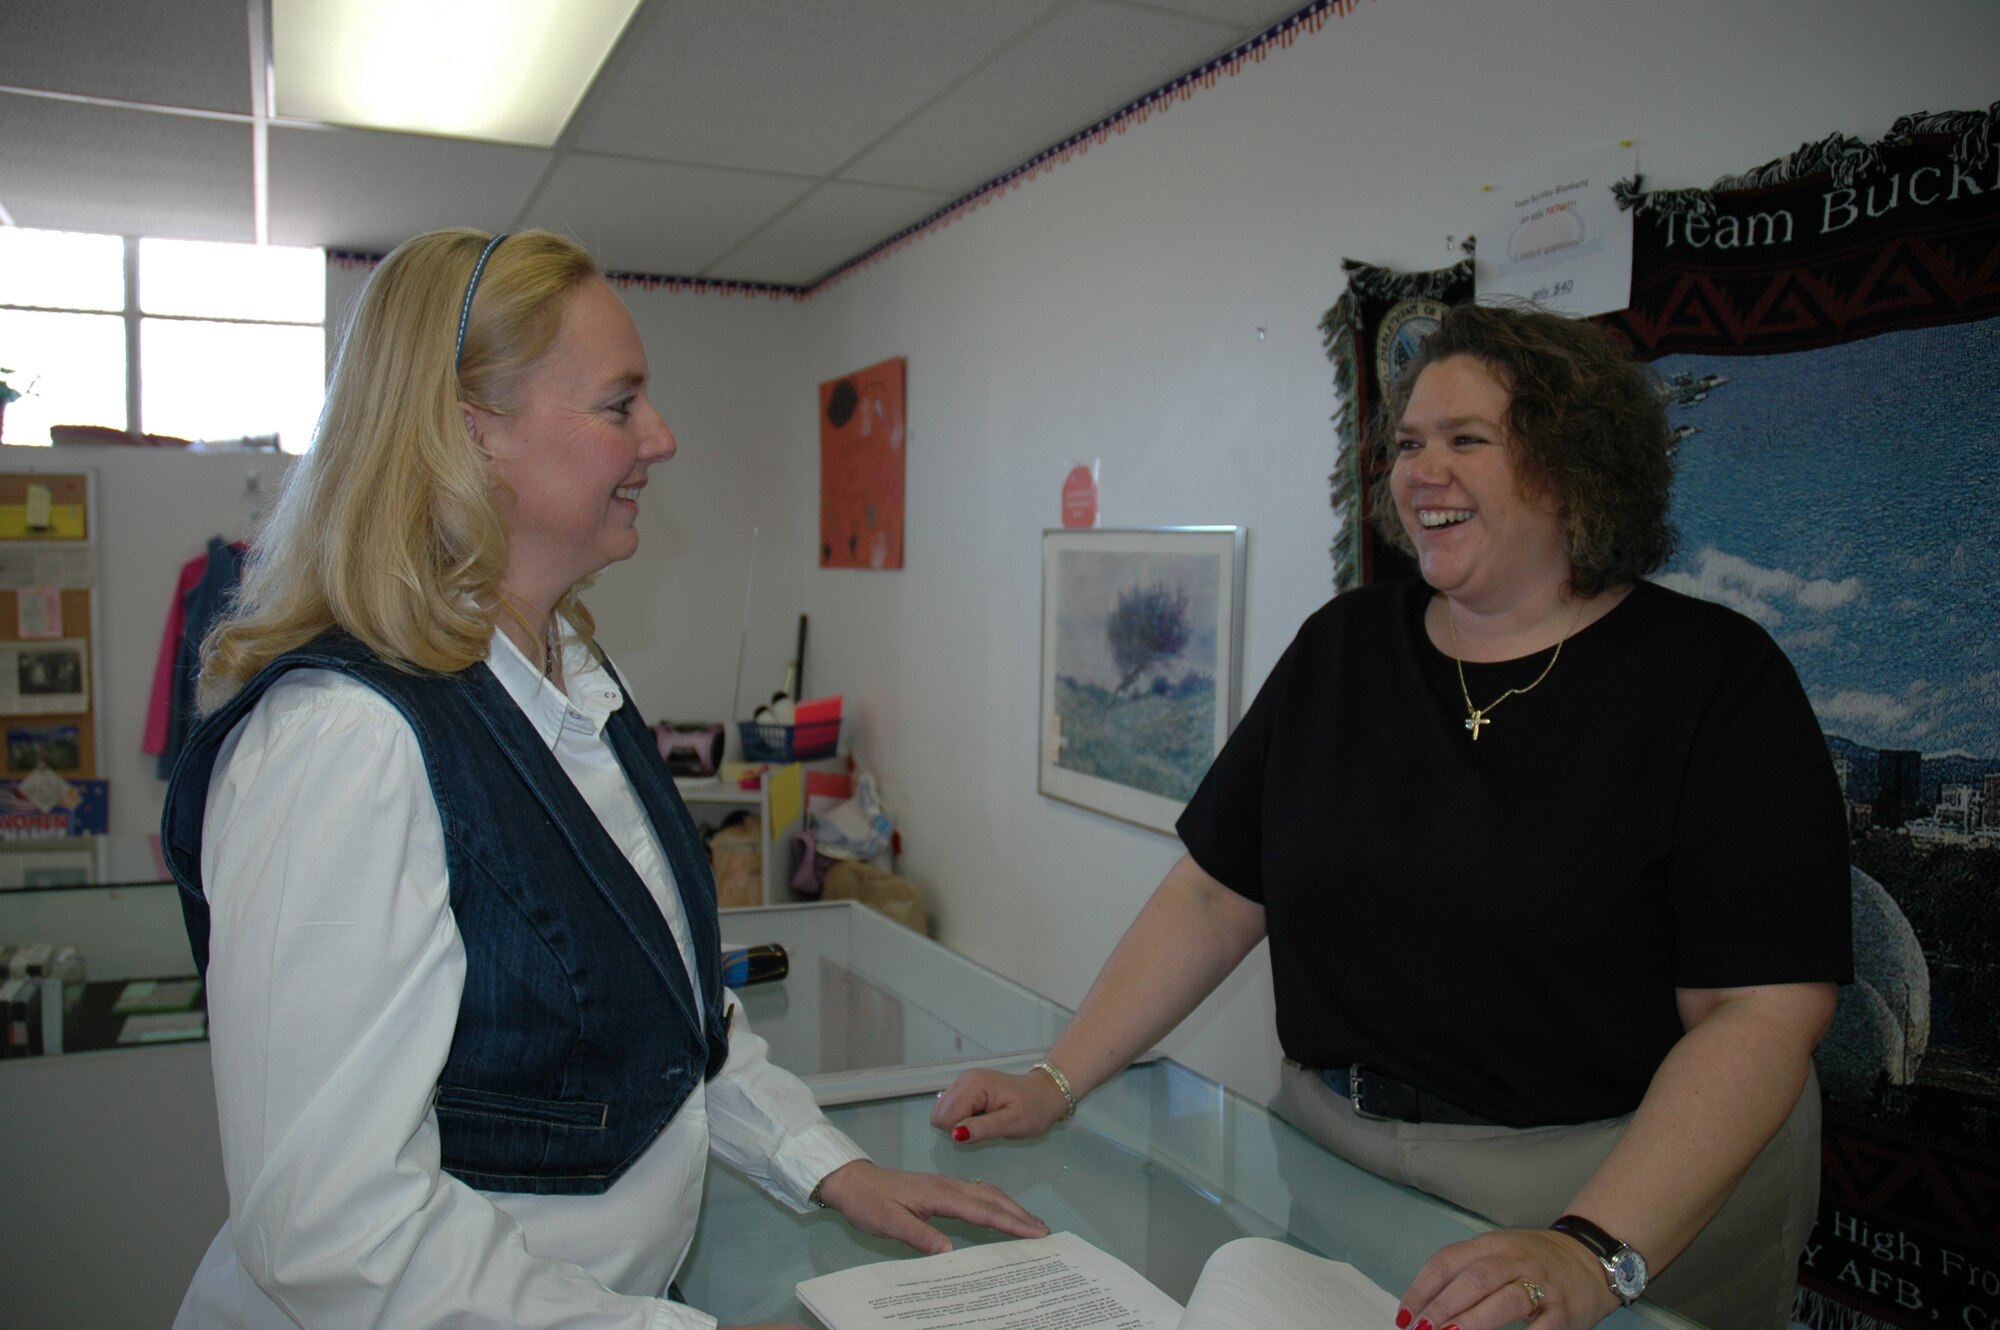 Mrs. Meredith Muhs, above left, stops in to visit and share a laugh with the new manager at the Buckley Thrift Shop, Mrs. Diane Herrlman.  Mrs. Muhs was named Buckley Air Force Base Spouse of the Year, then Air Force Space Command Spouse of the Year, and will now compete at the Air Force level for the same honor. (U.S. Air Force photo by Mrs. Barbara Atwell)